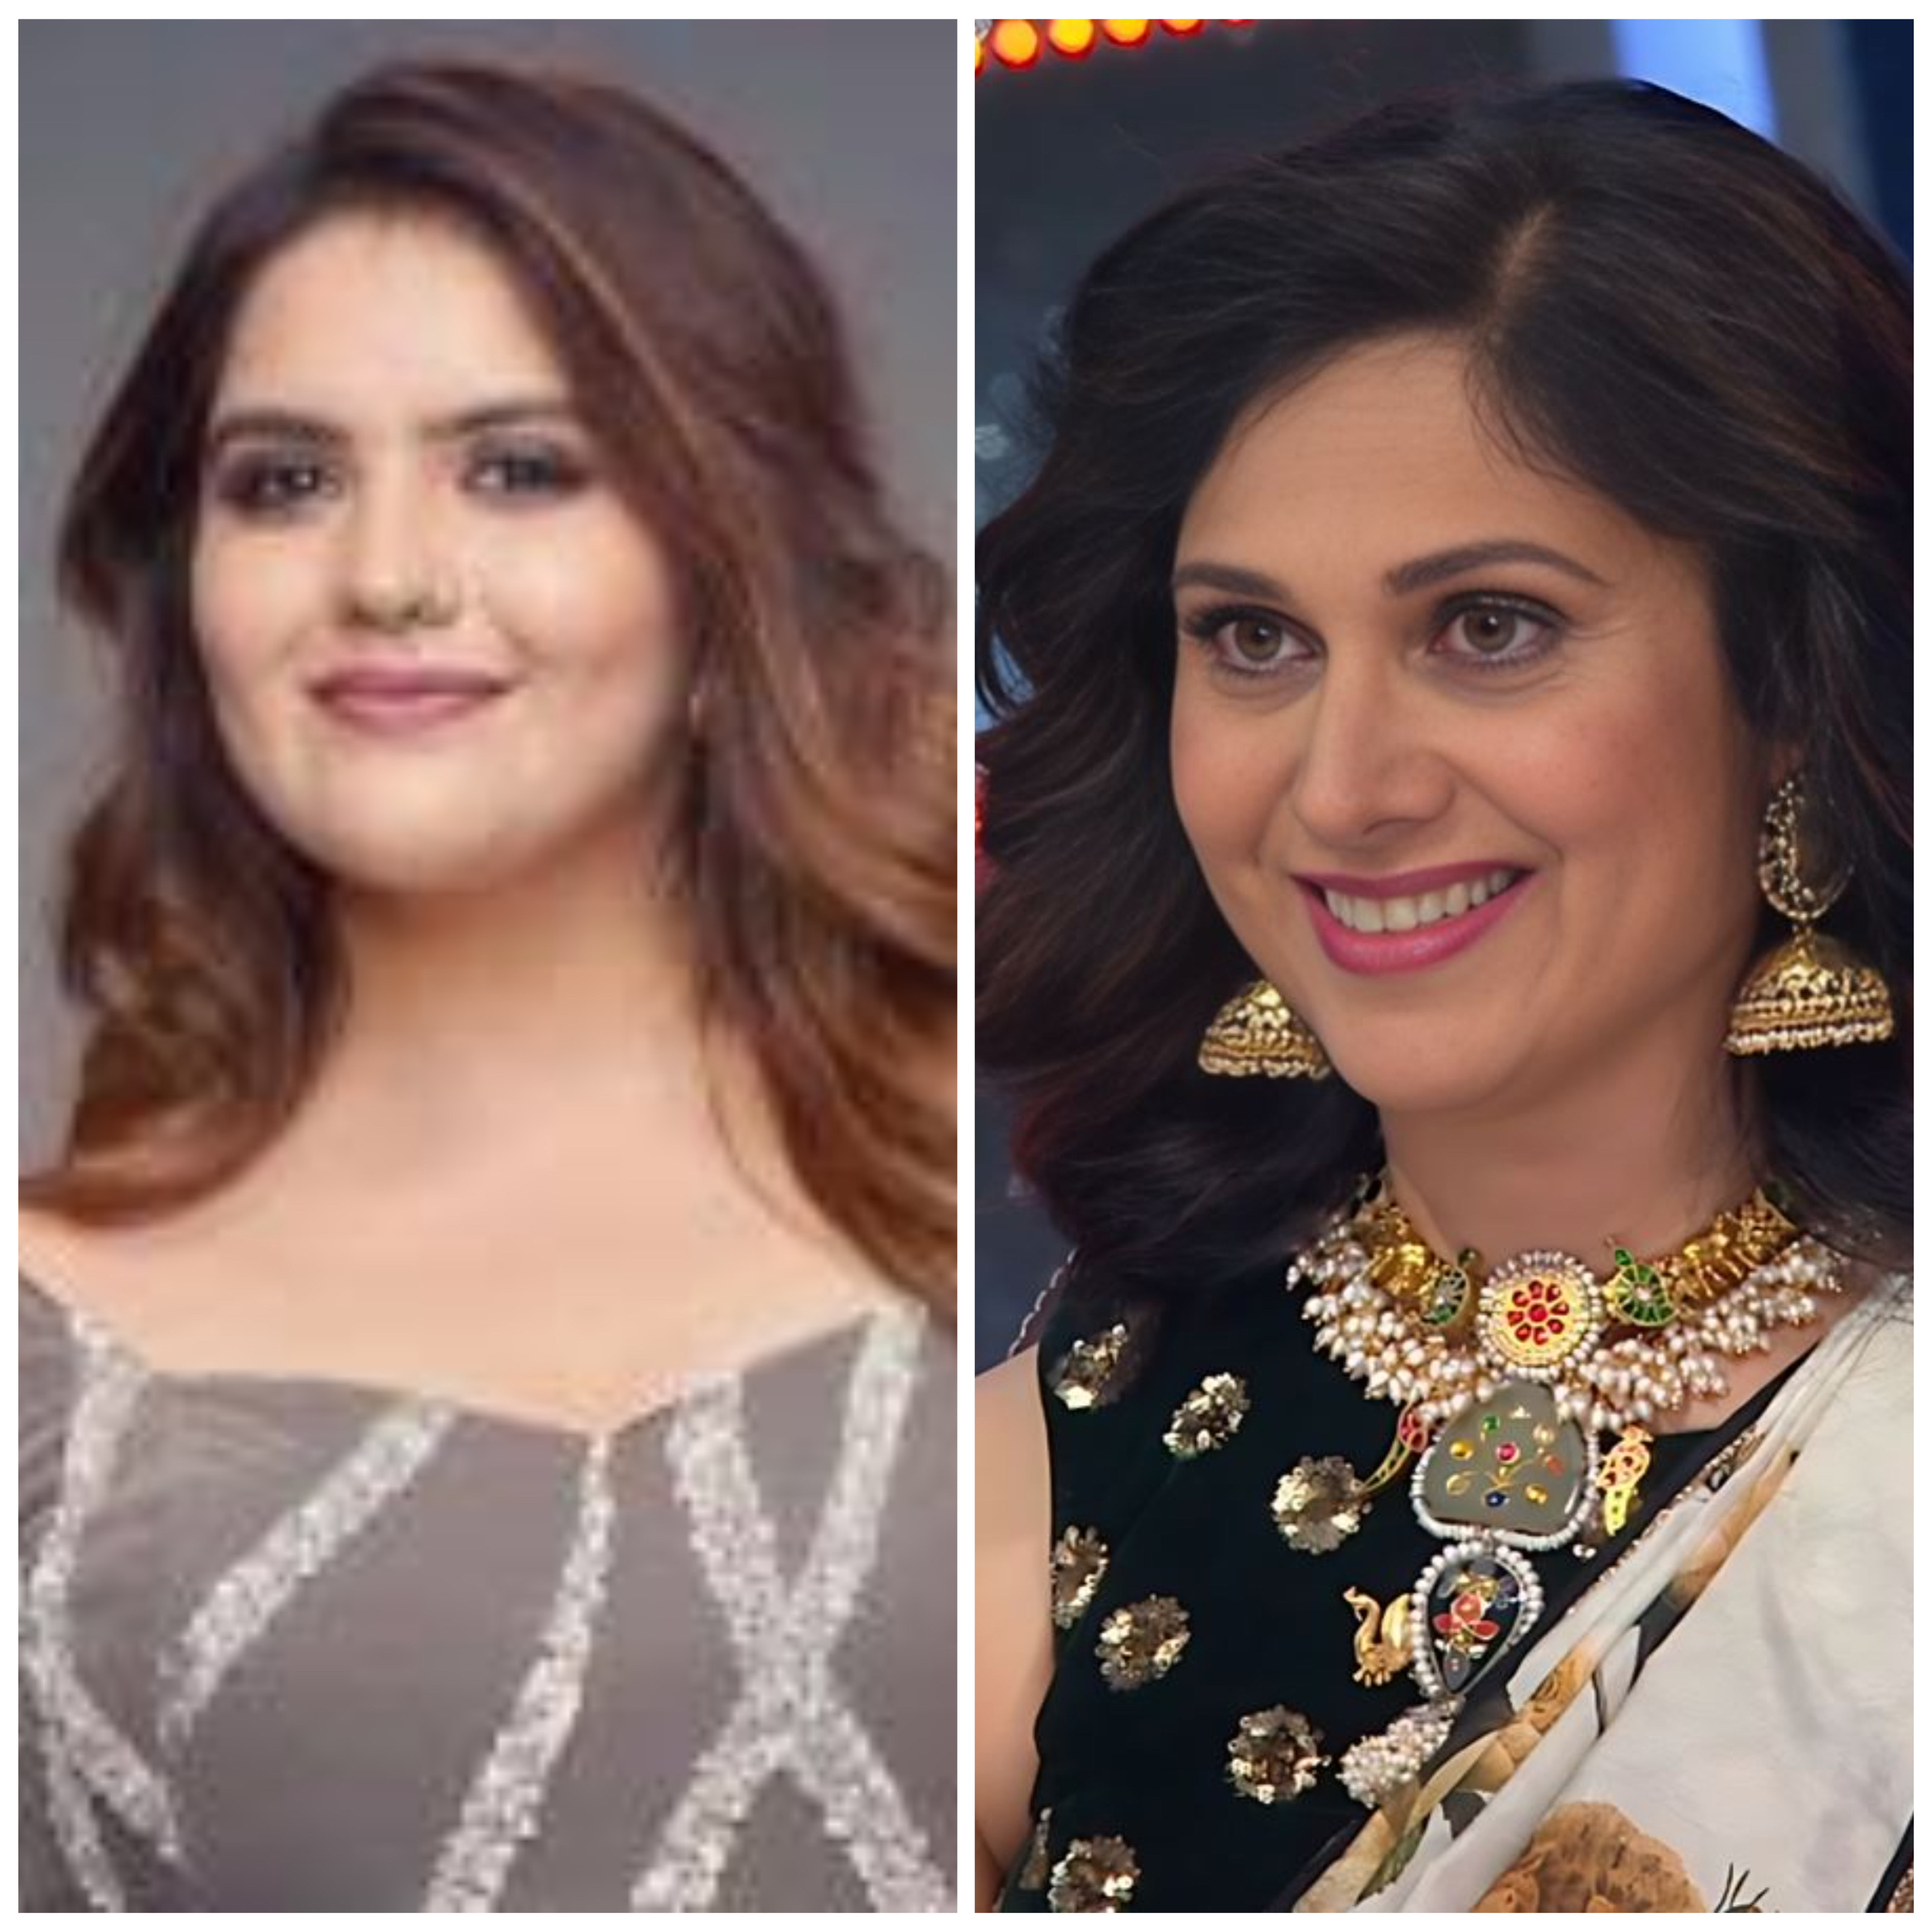 Anjali Anand receives standing ovation for her performance from Meenakshi Seshadri on Jhalak Dikhhla Jaa 11; judges can’t hold back their praises!